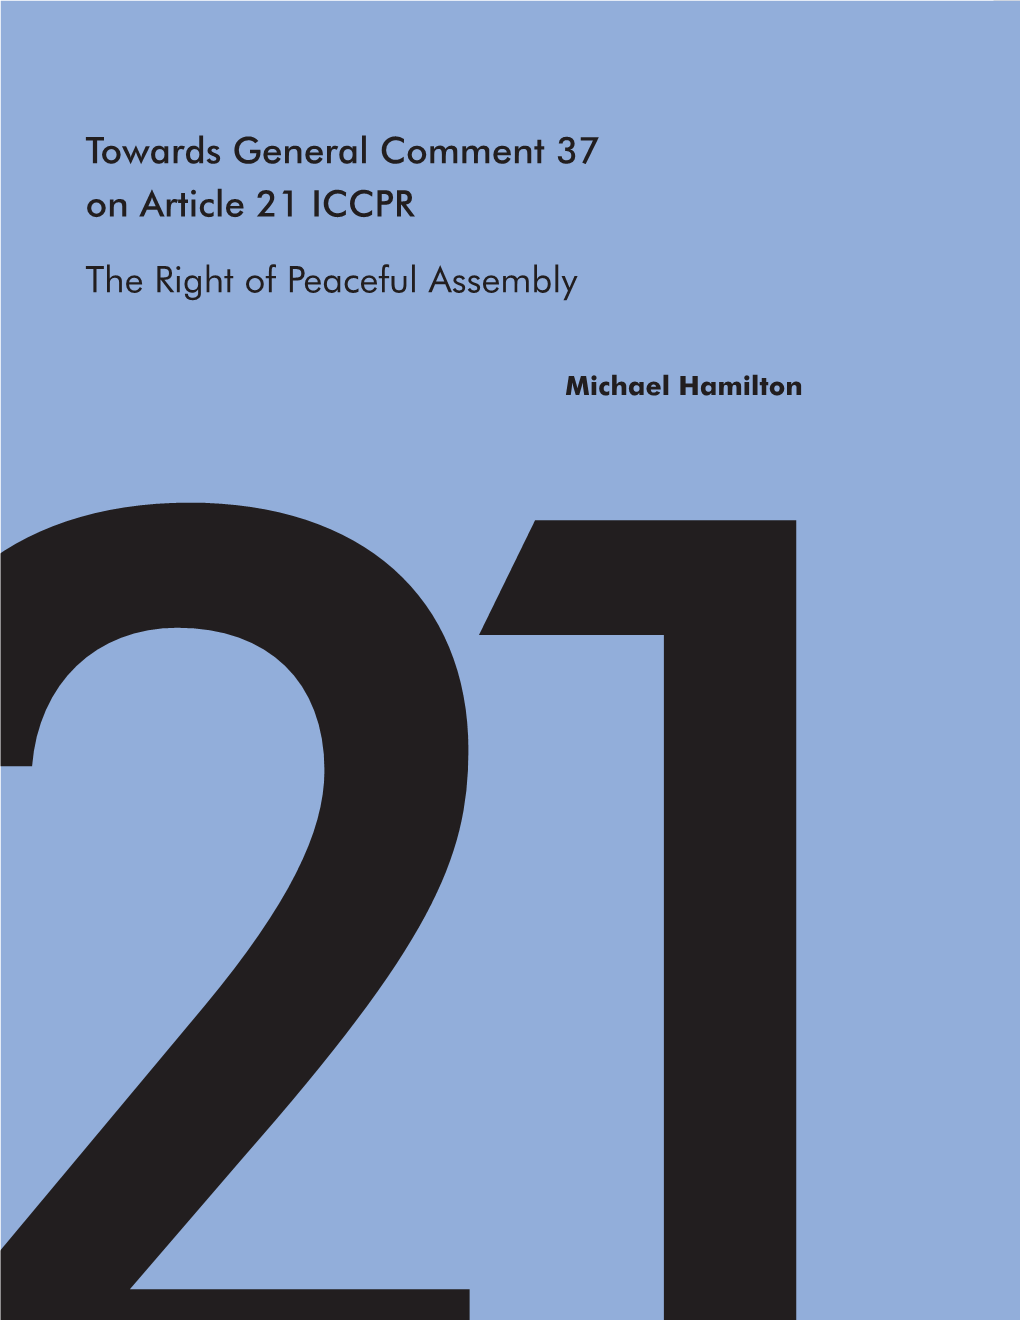 Towards a General Comment on Article 21 ICCPR